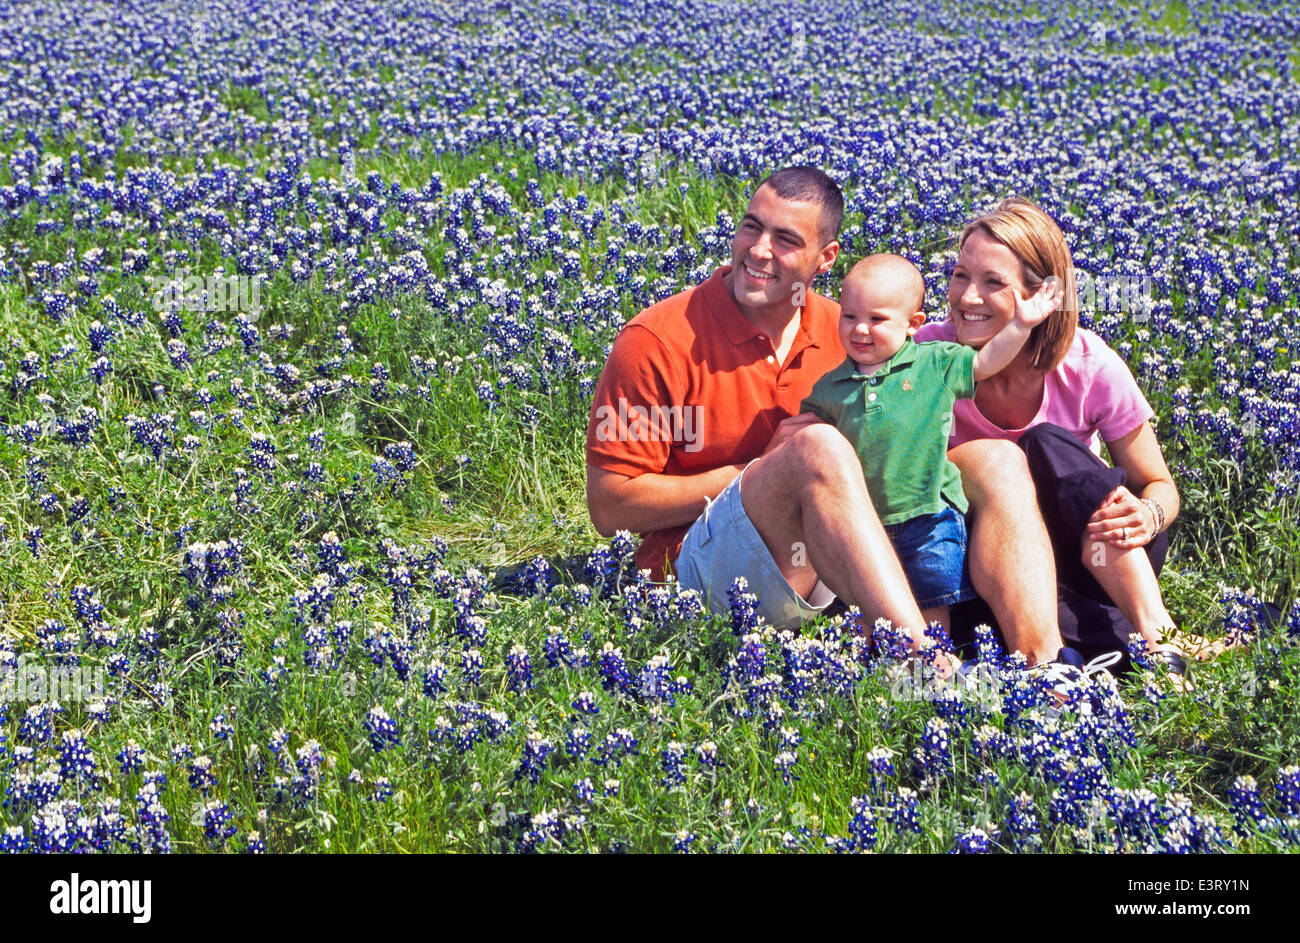 A young couple and their playful son relax on a sunny day in a field of bluebonnets, the official state flower of Texas, USA. Model released. Stock Photo